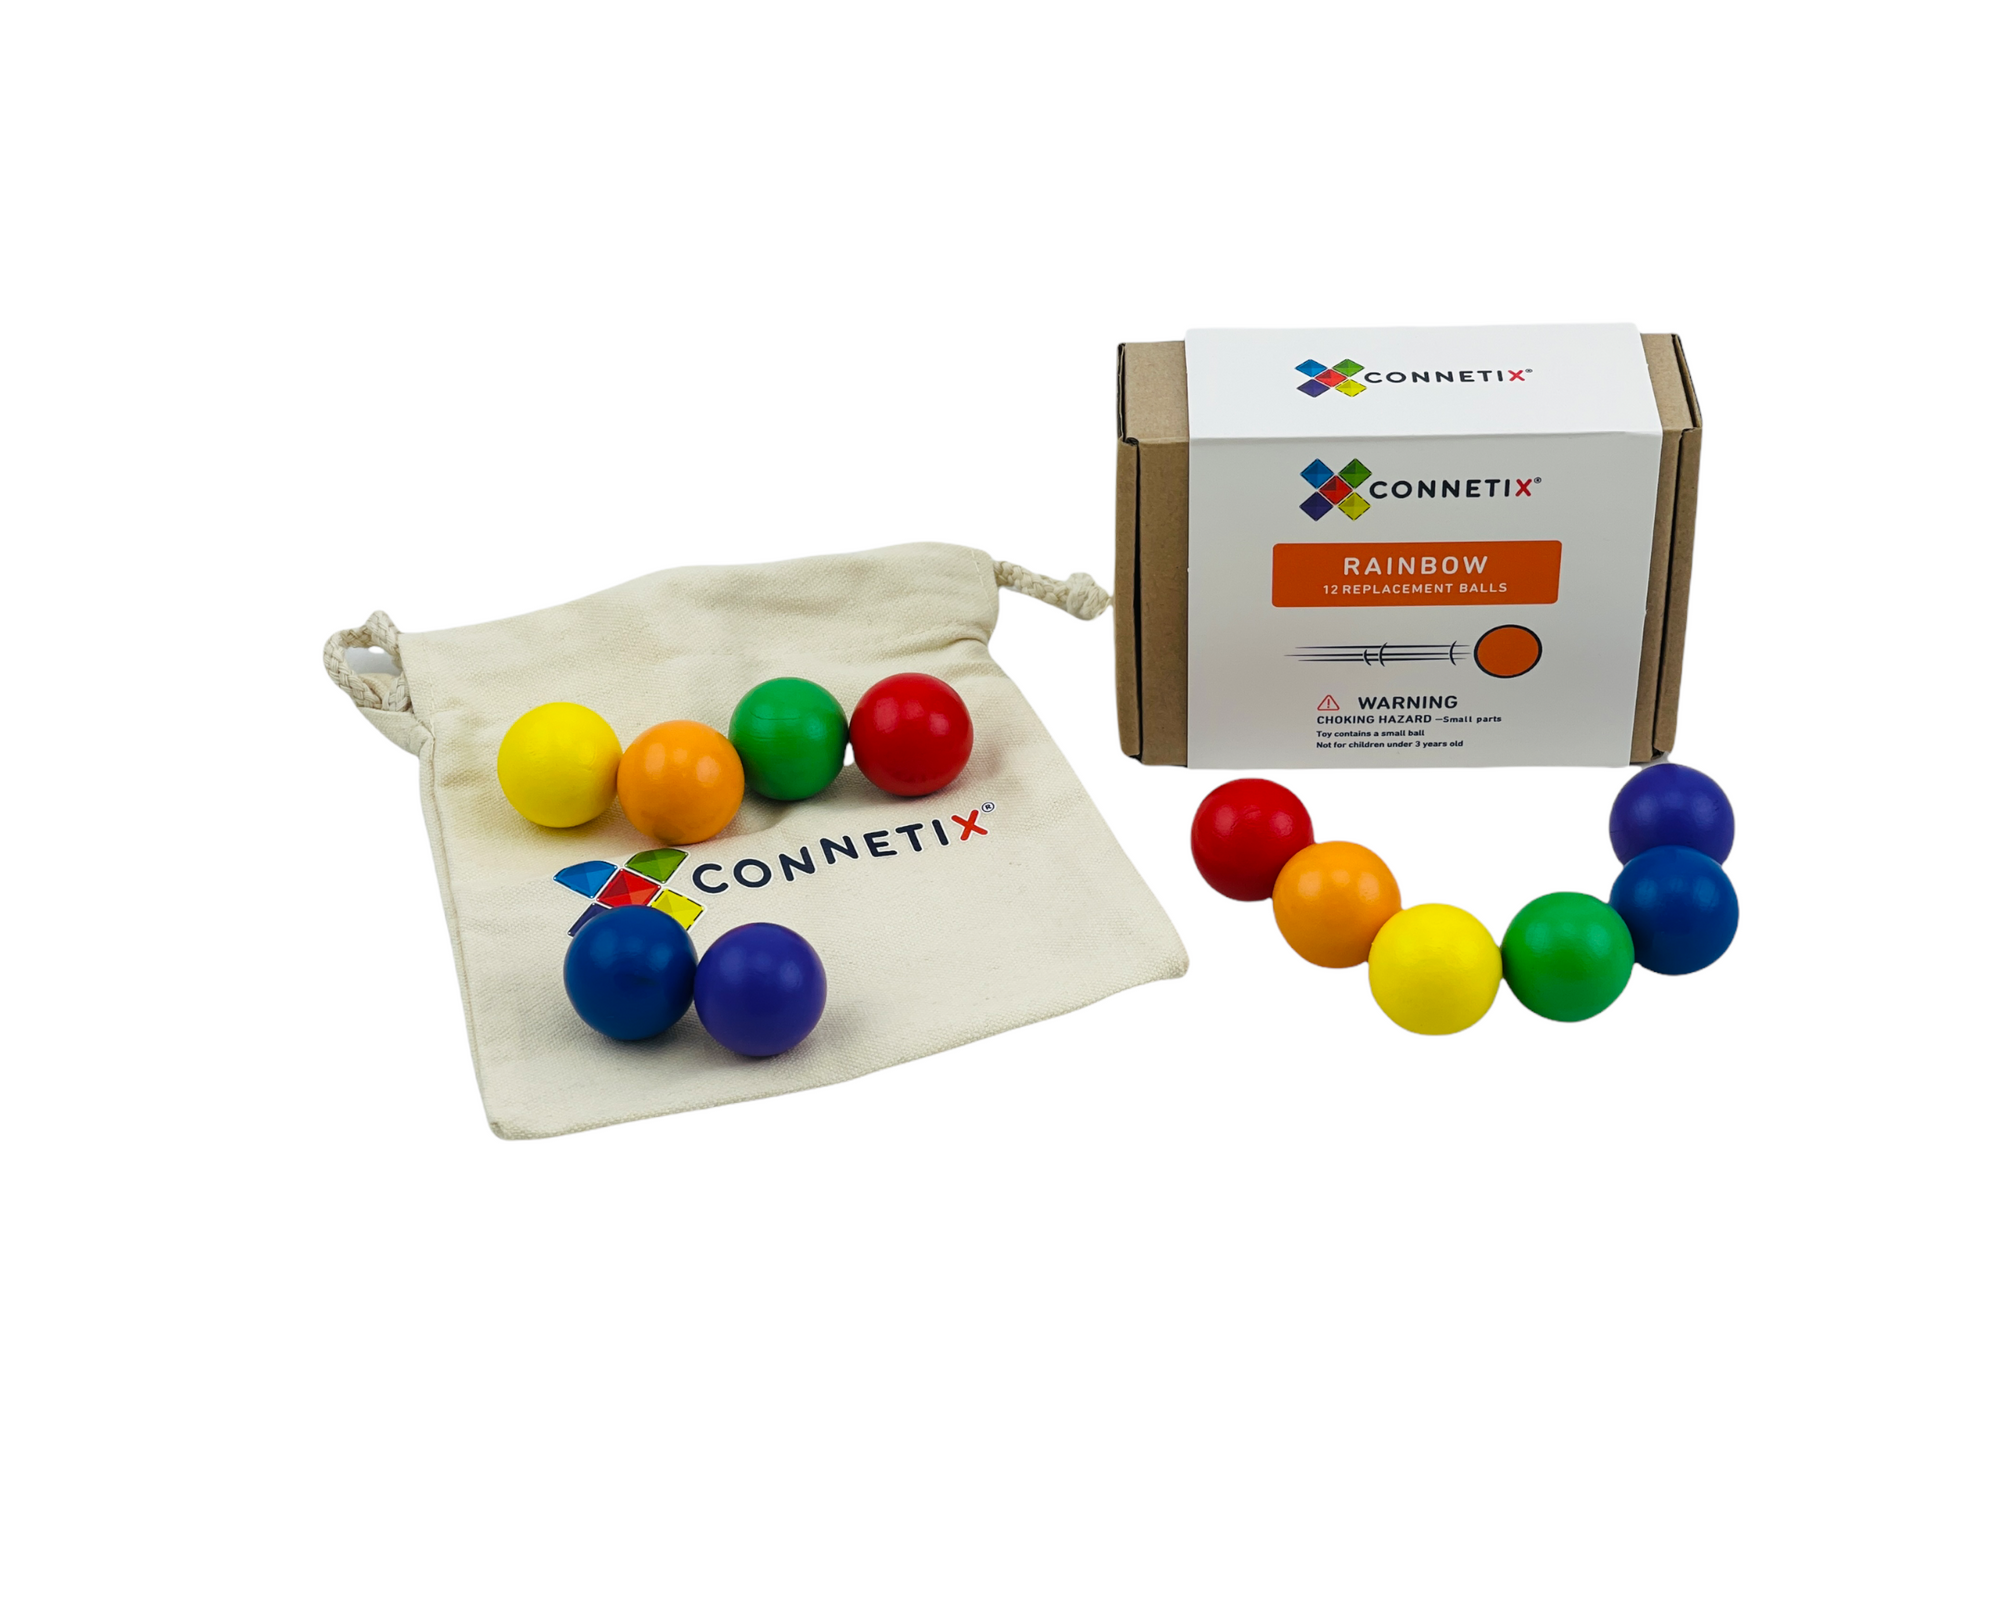 Connetix Replacement Ball Pack - Rainbow on display with 16 rainbow balls and white back in front of box